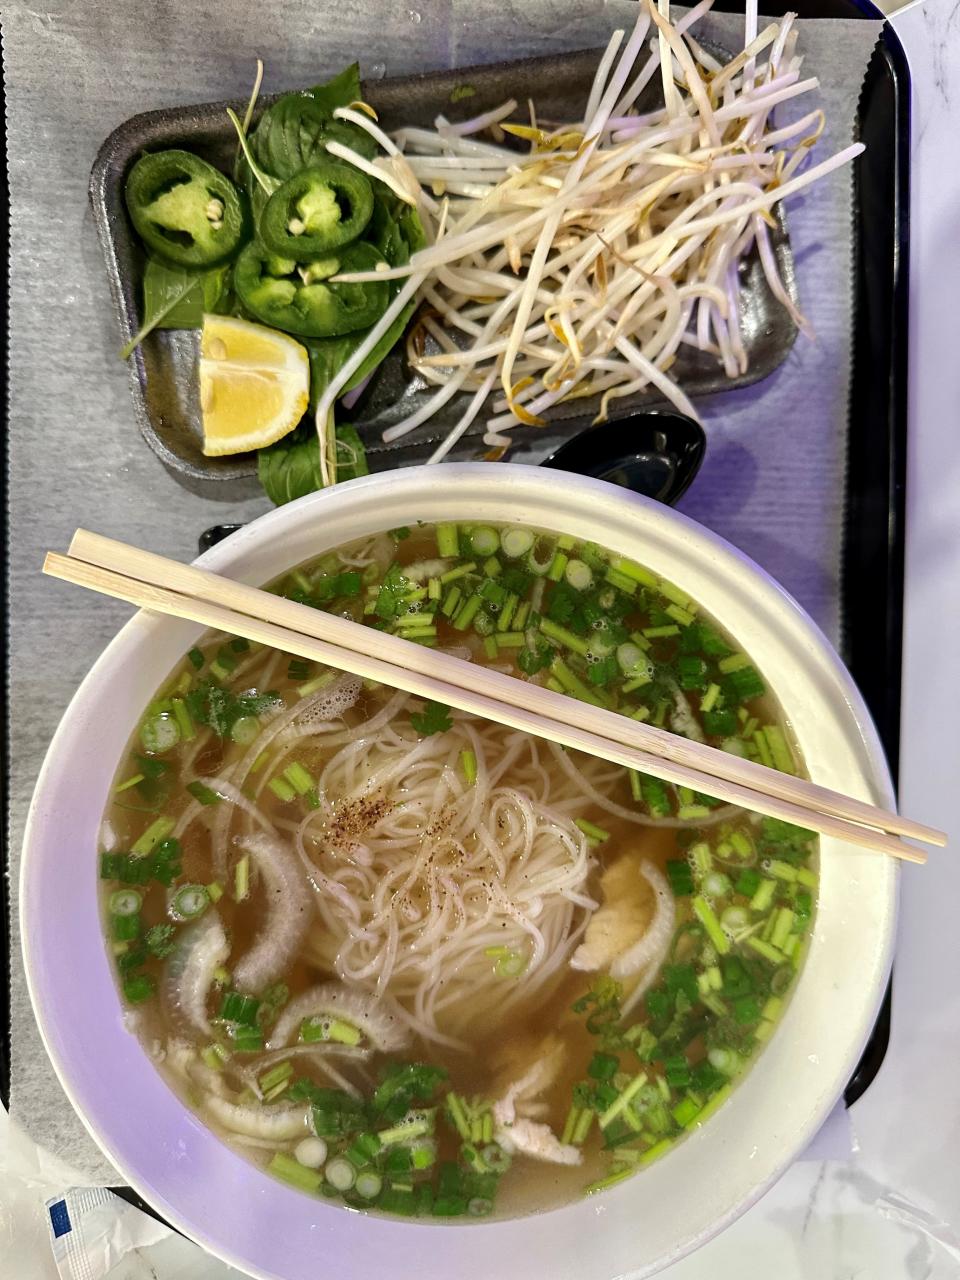 Food writer Lyn Dowling, on the phở at Saigon Baguette: "Everything about it was grand, a dish that was at once substantial and delicate.Everything about it was grand, a dish that was at once substantial and delicate."